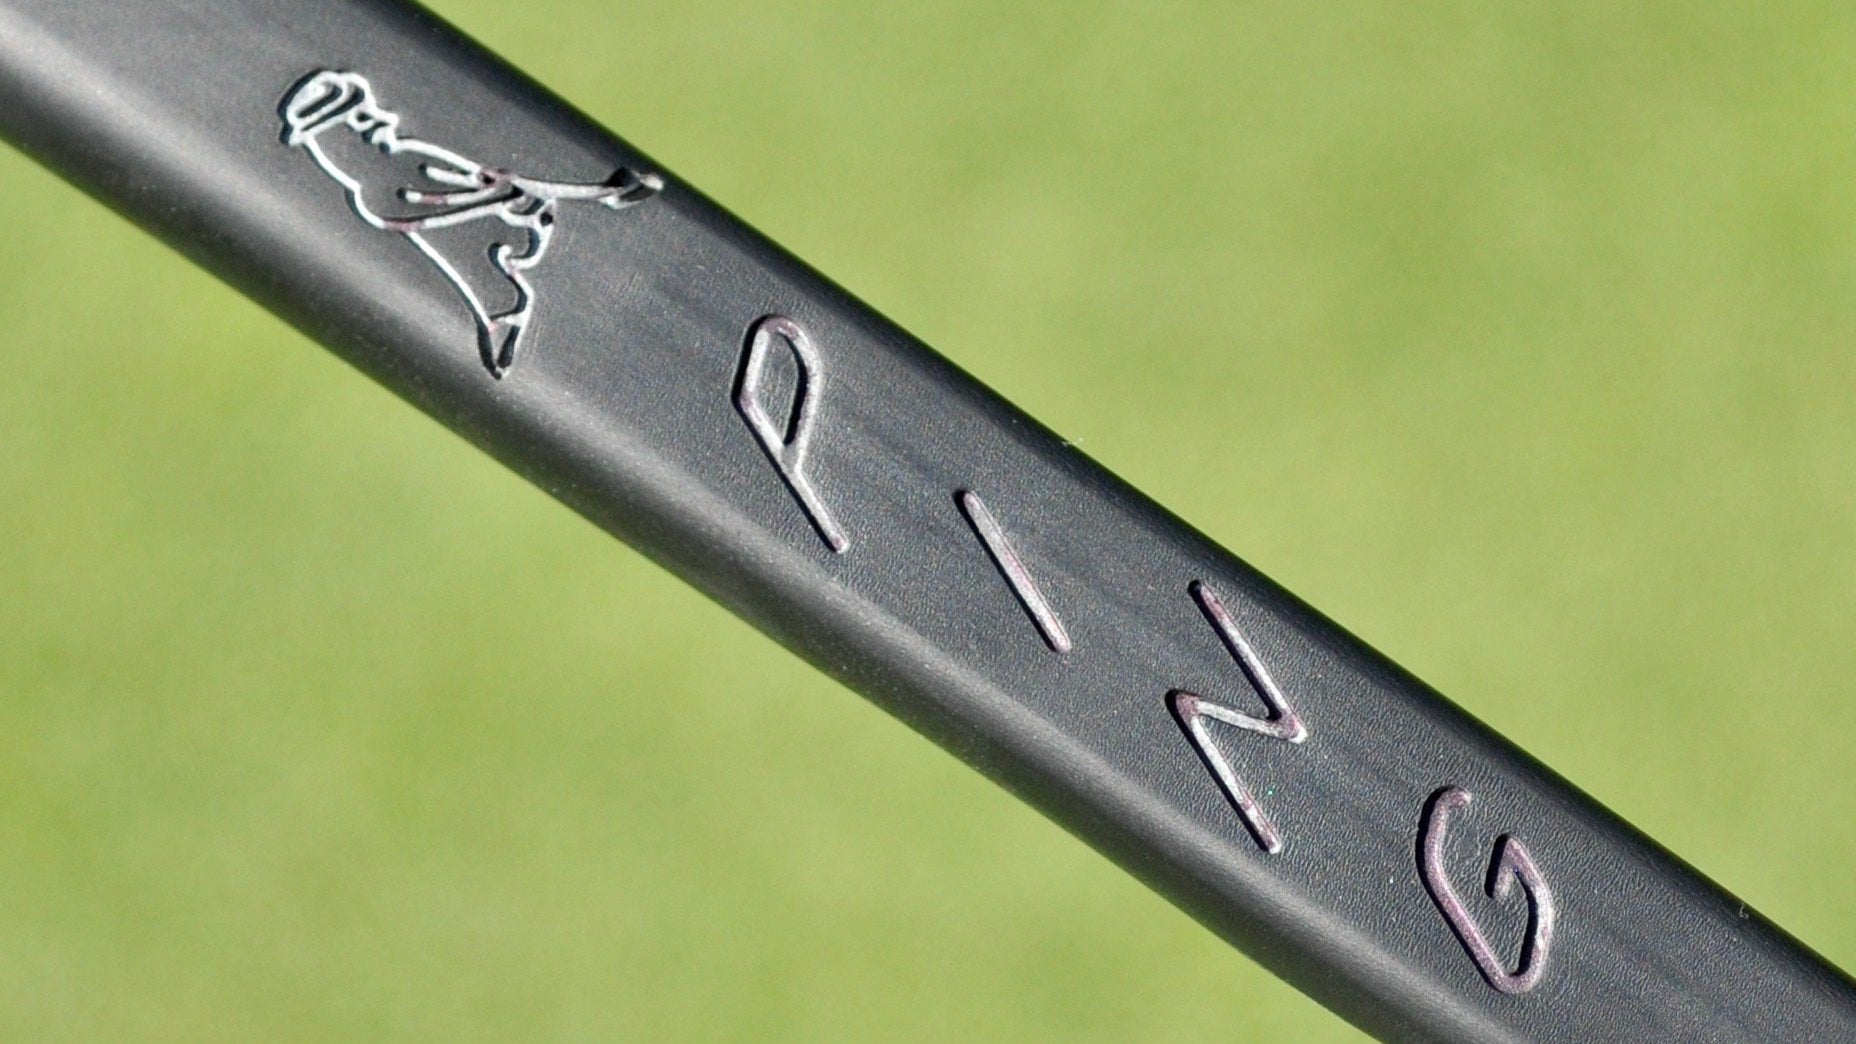 Tiger Woods' legendary putter as you've never seen it before